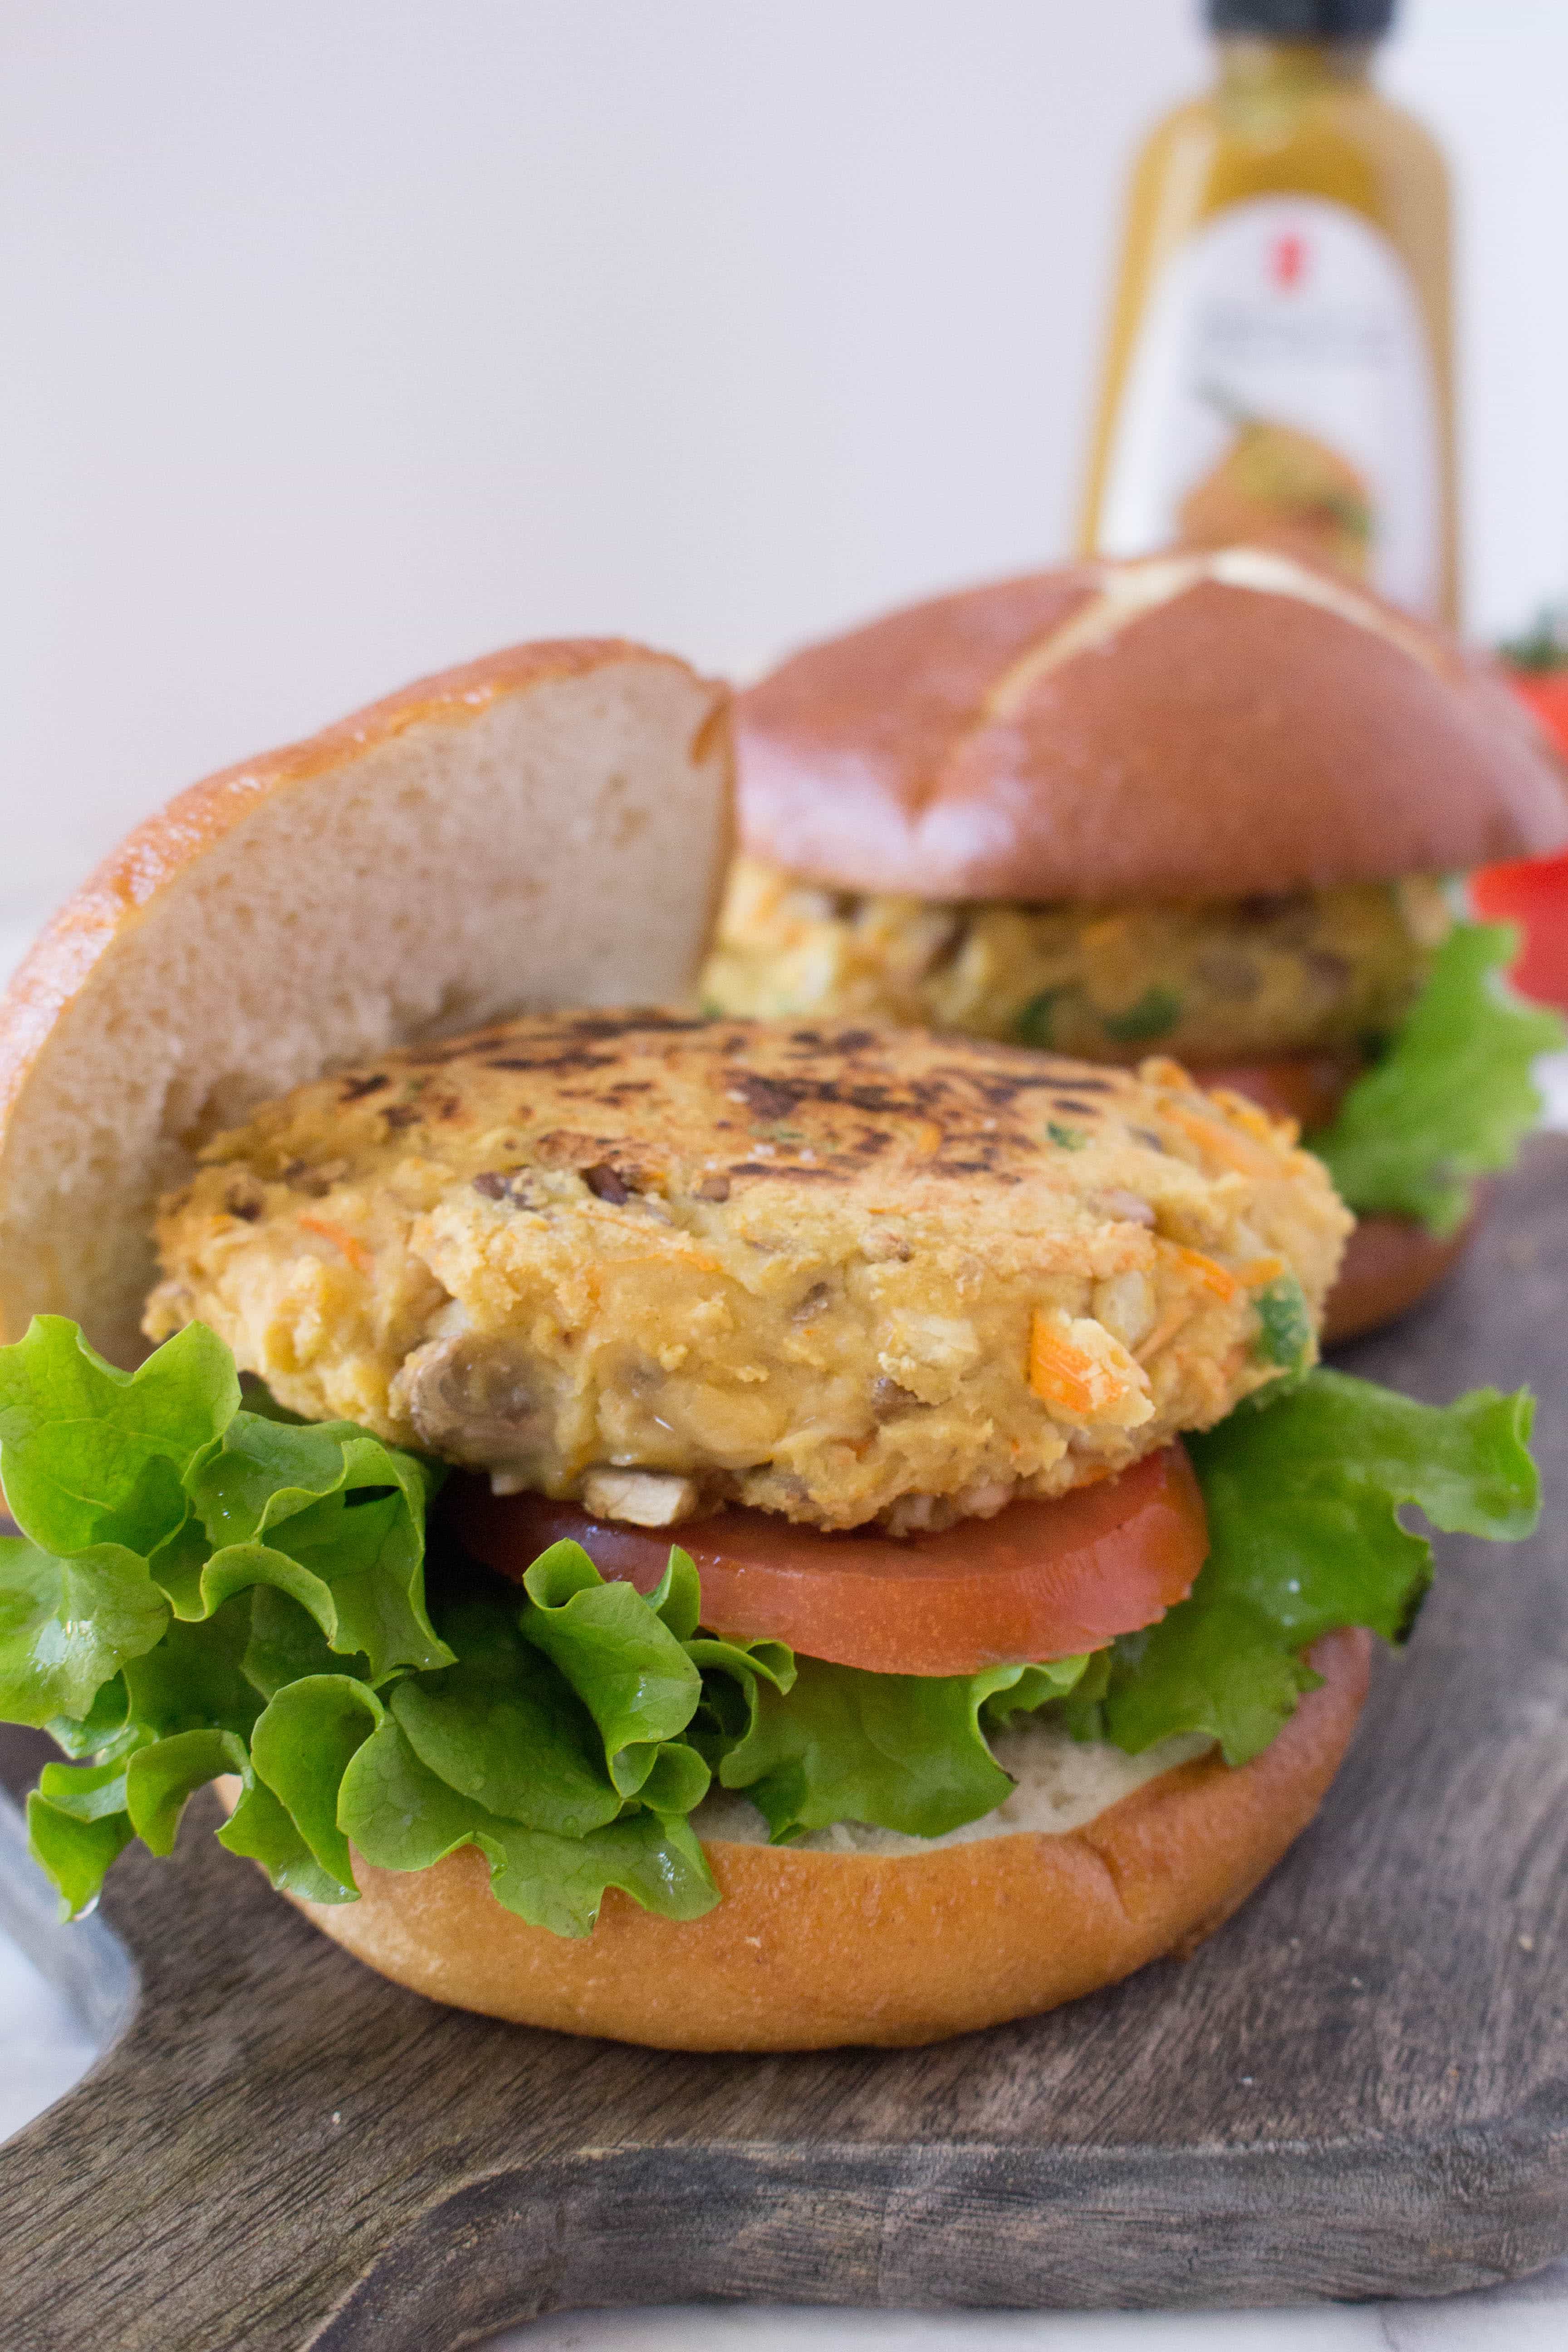 Chickpea and Brown Rice Burger